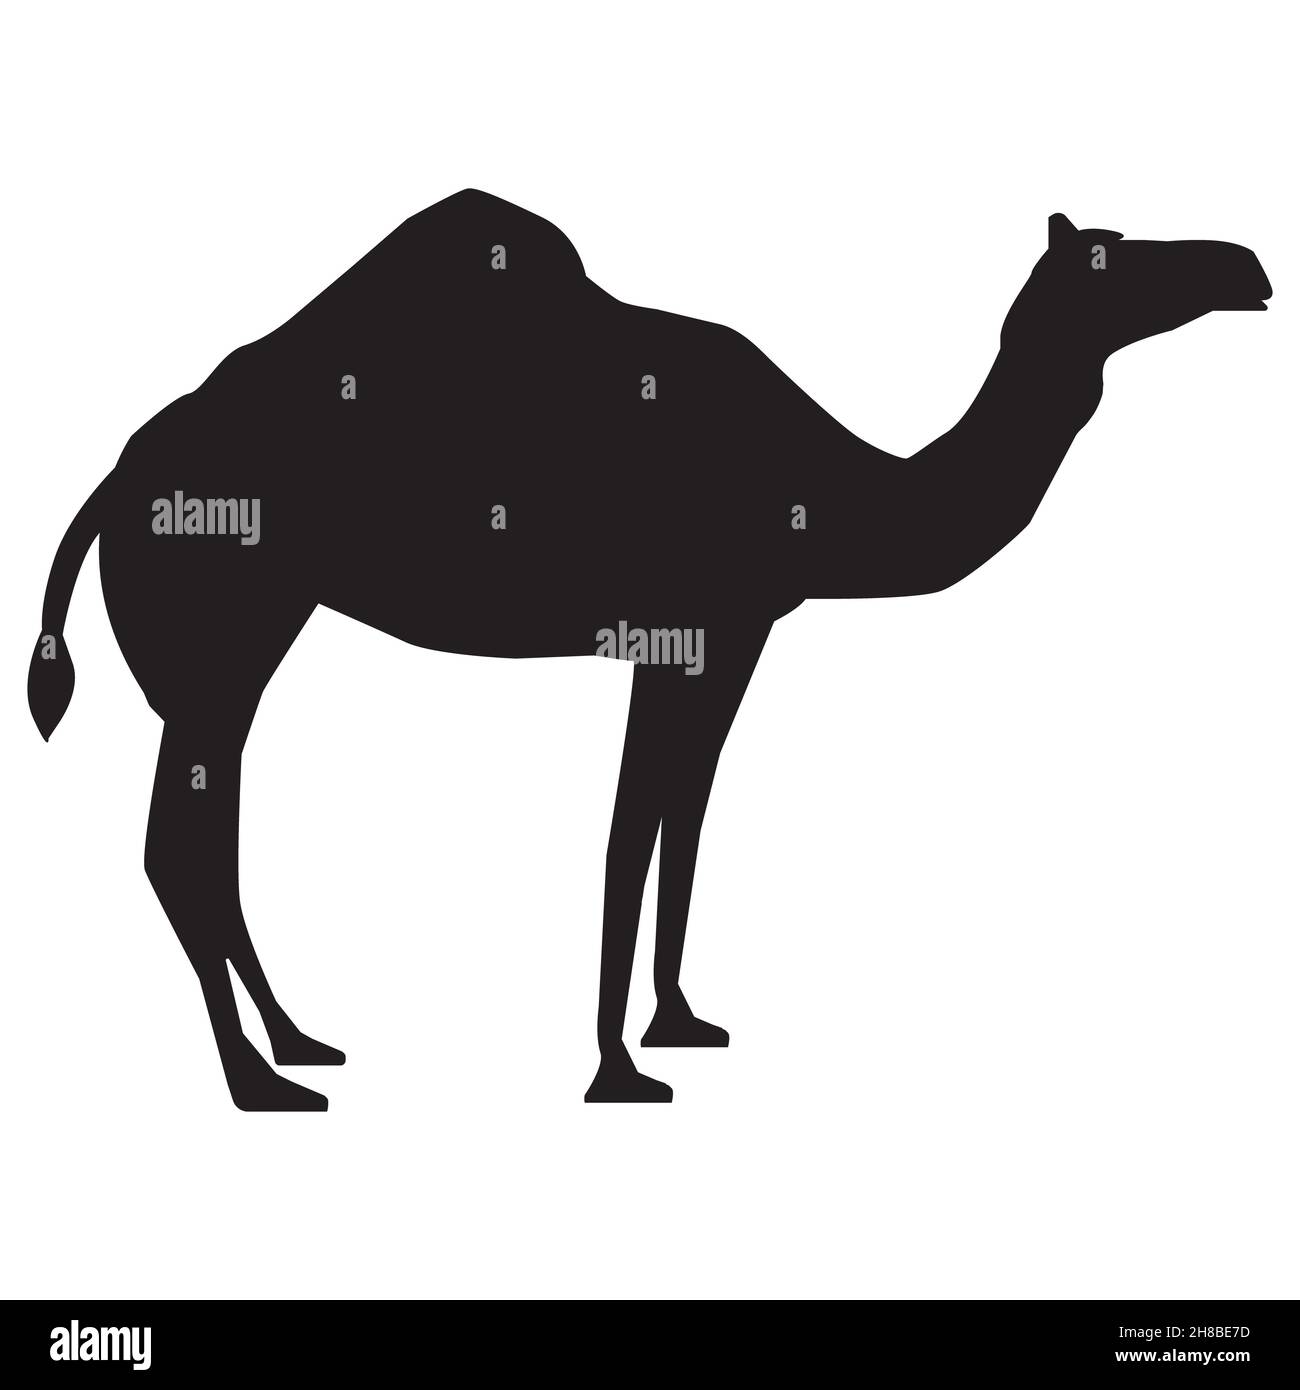 hump nose images clipart